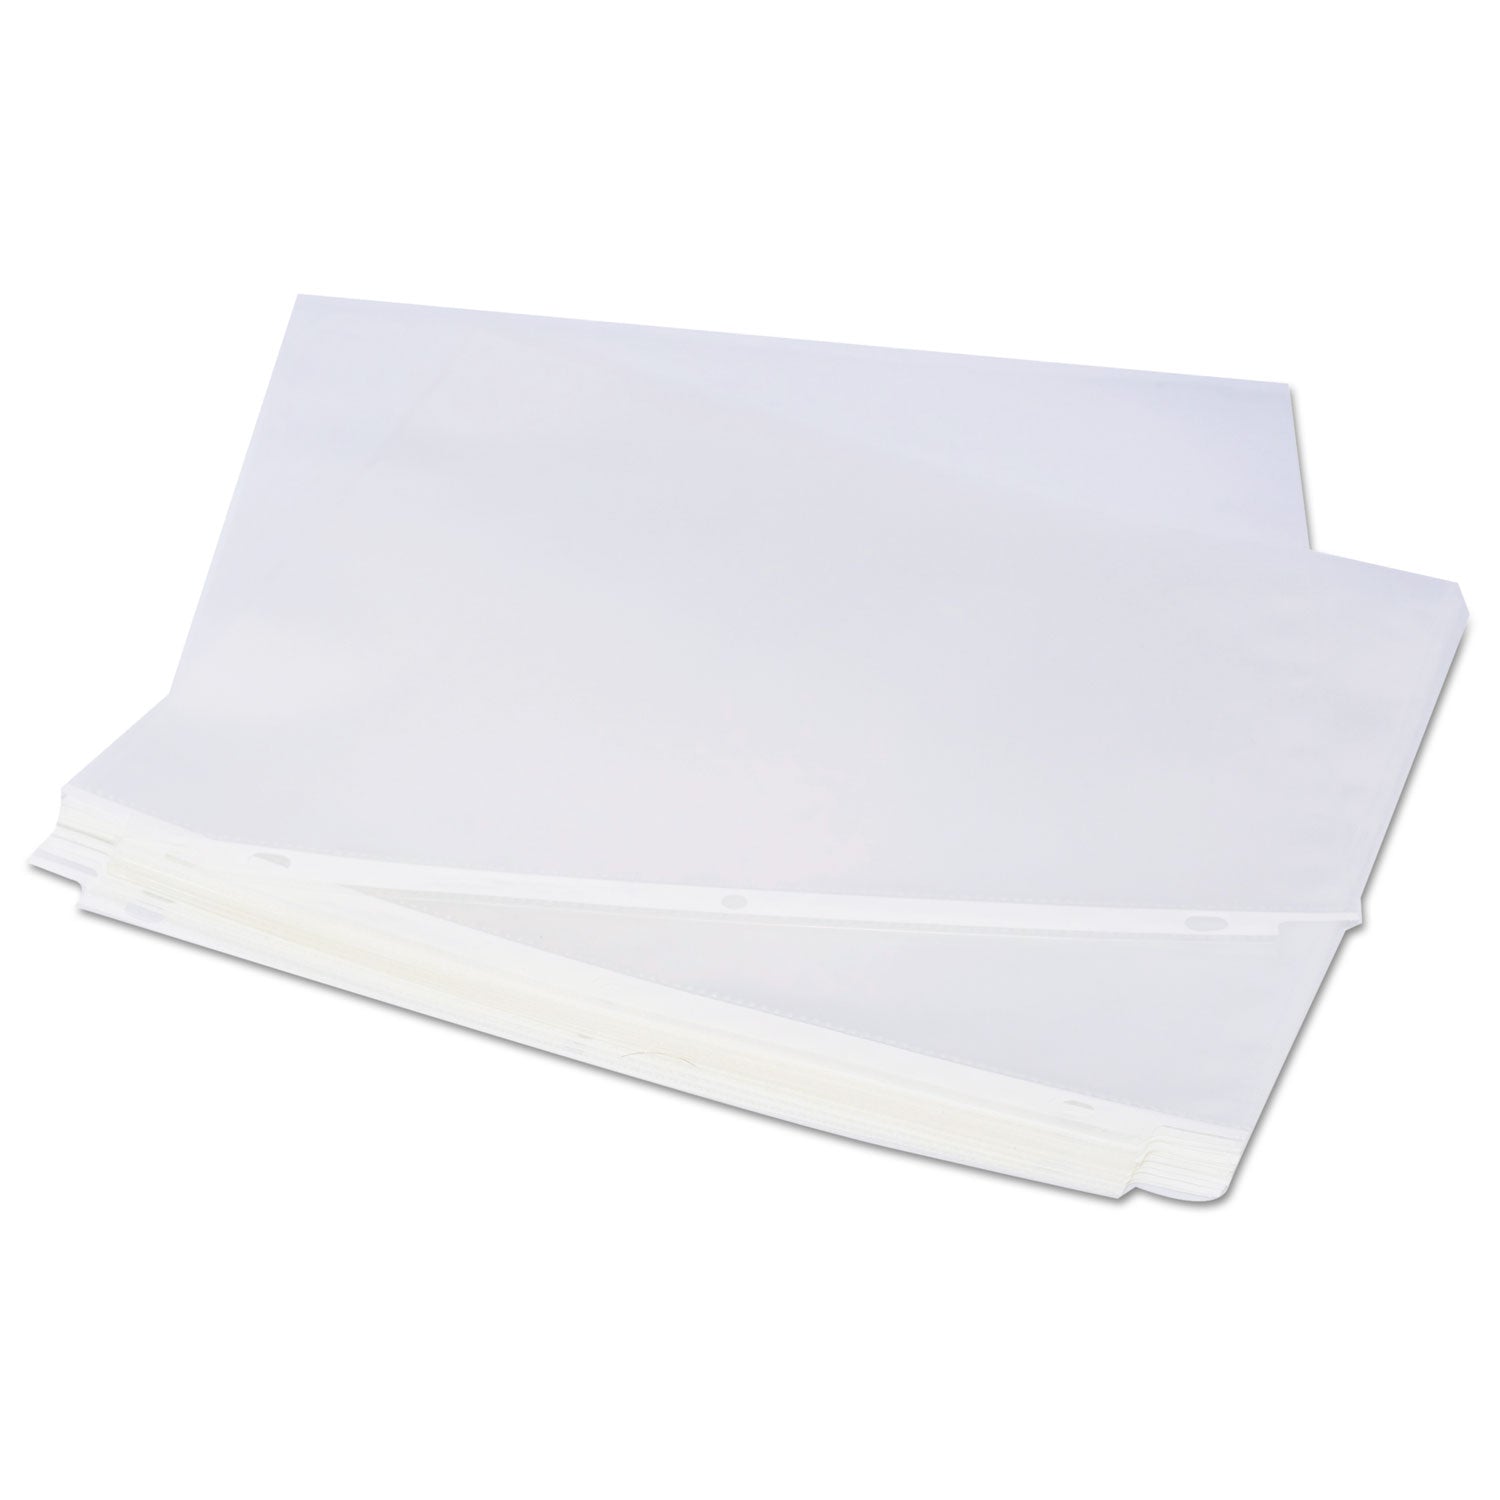 standard-sheet-protector-economy-85-x-11-clear-200-box_unv21123 - 6